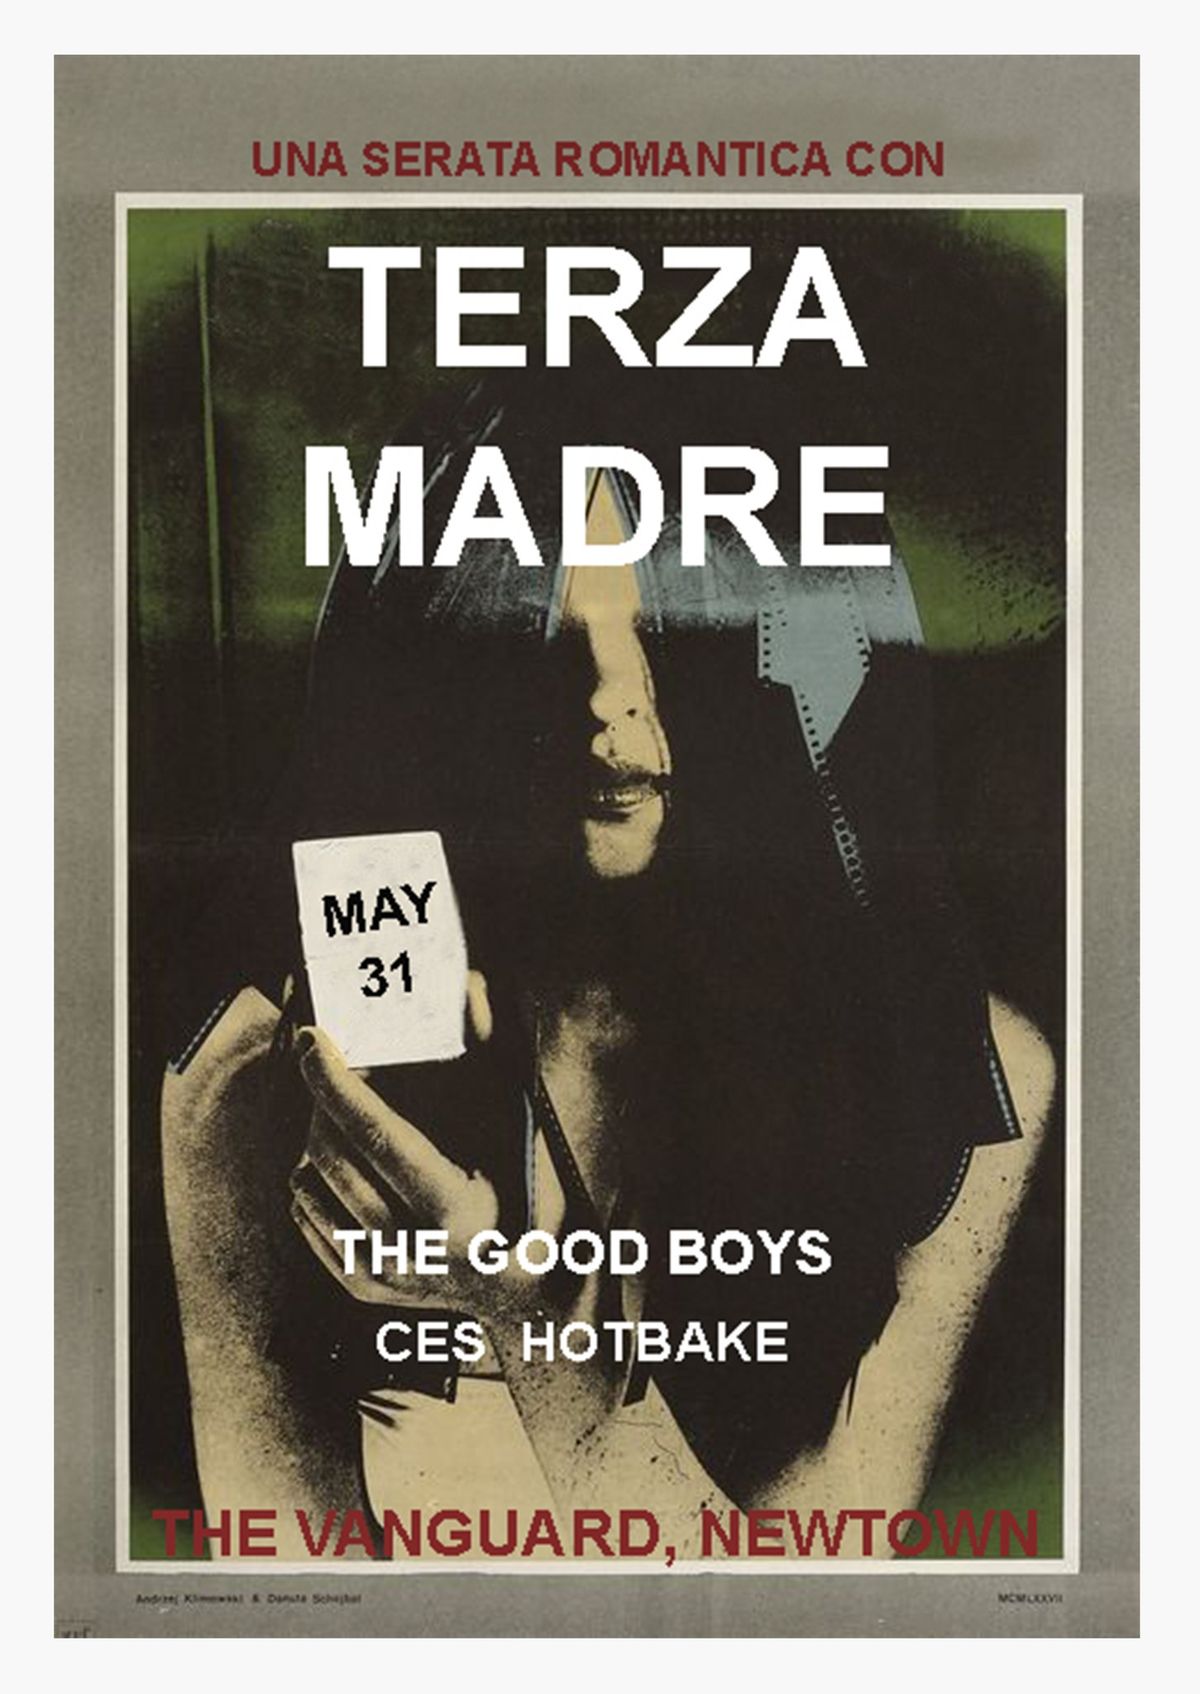 A Romantic Evening w\/ TERZA MADRE + THE GOOD BOYS+CES HOTBAKE